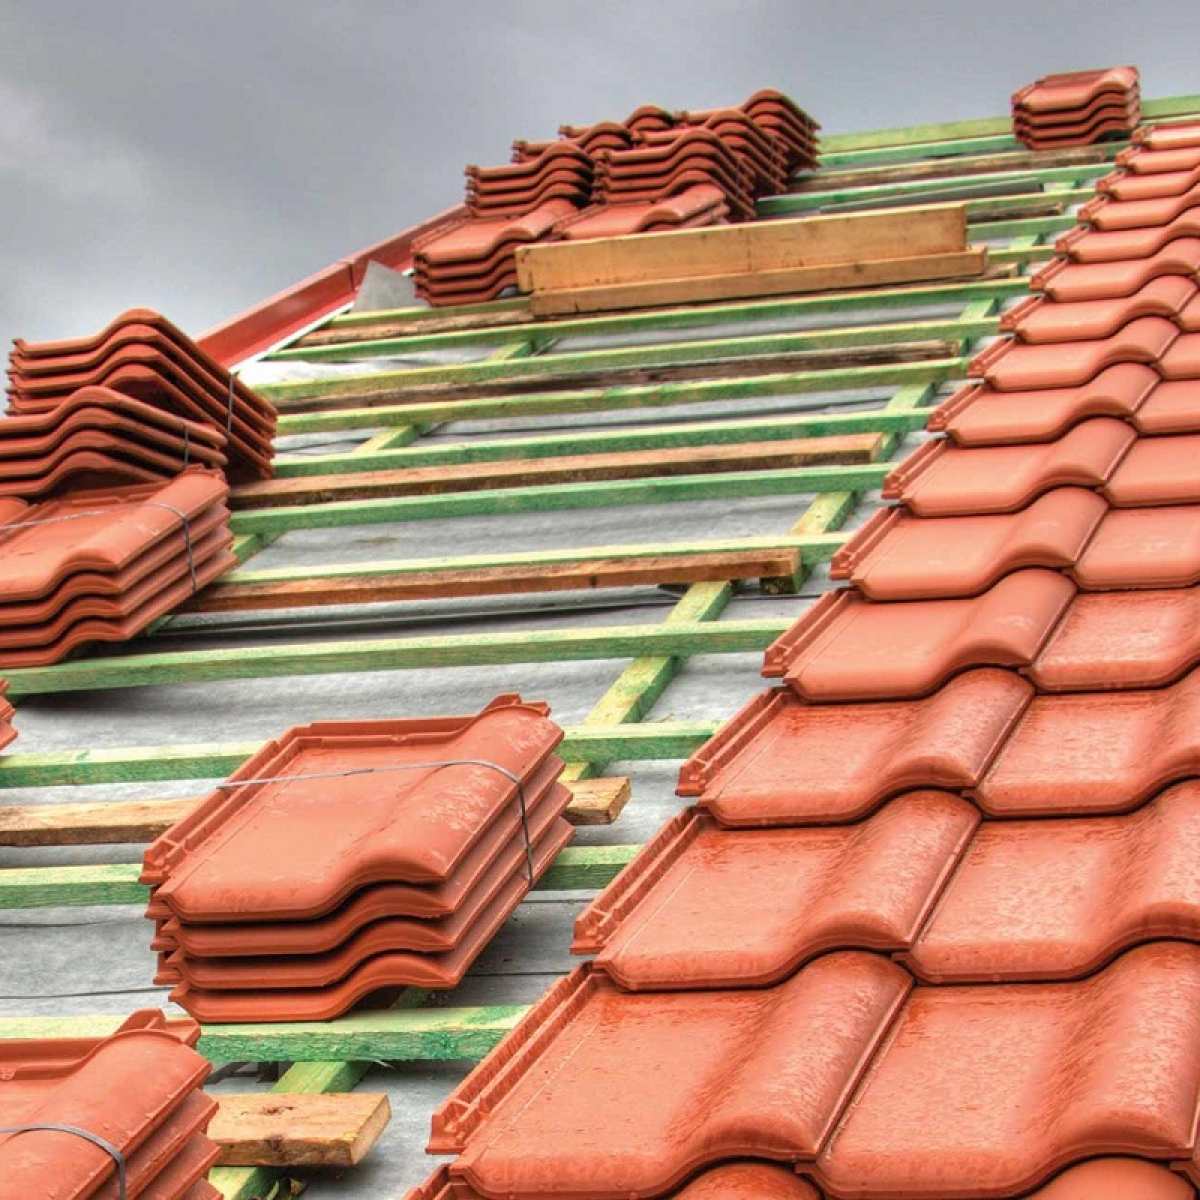 afp roofing battens Image by Websters Timber